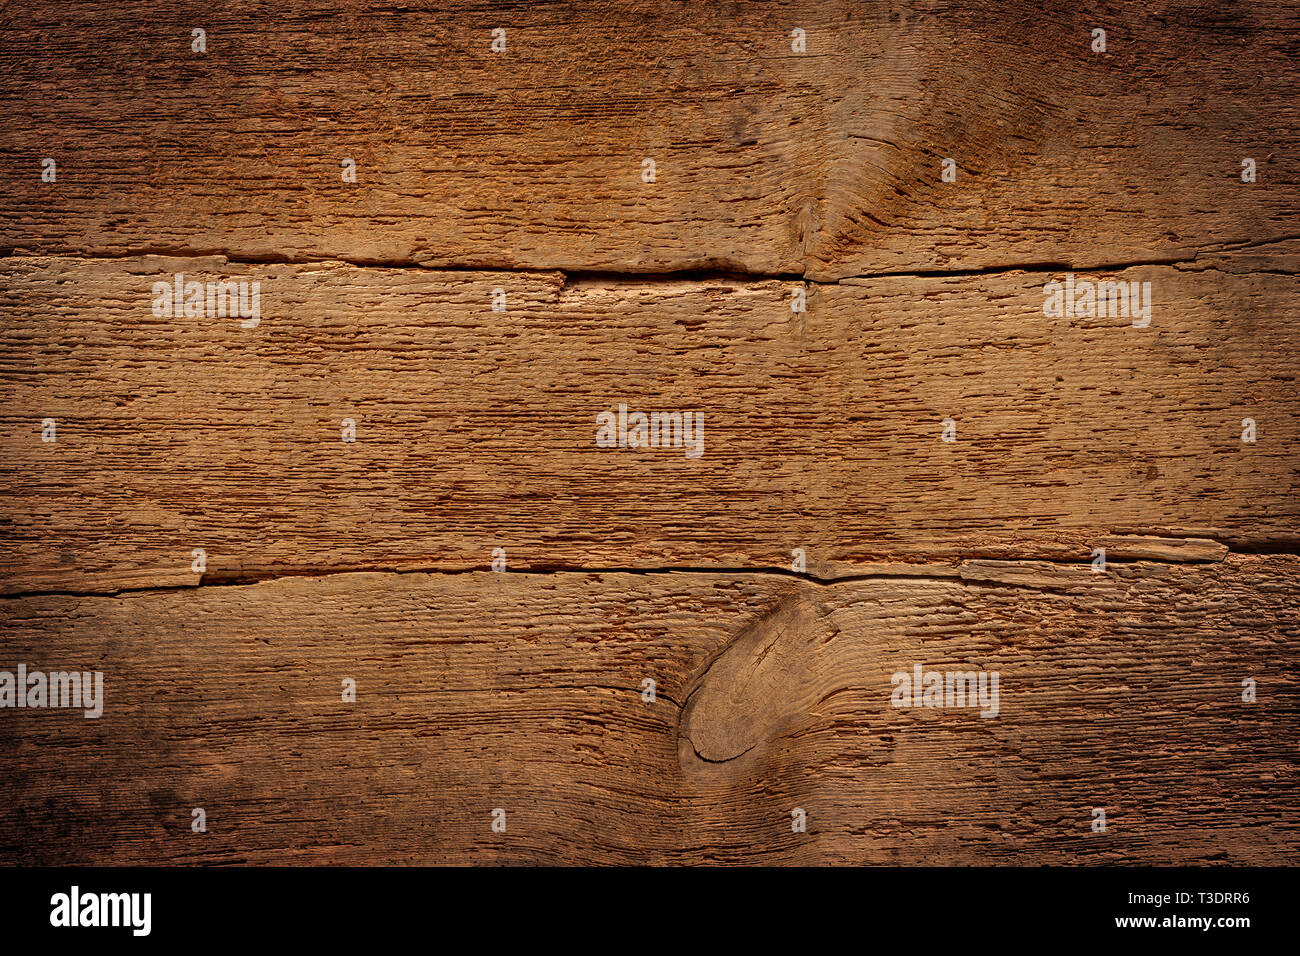 old rustic retro wood wooden texture dark brown vintage weathered natural  background Stock Photo